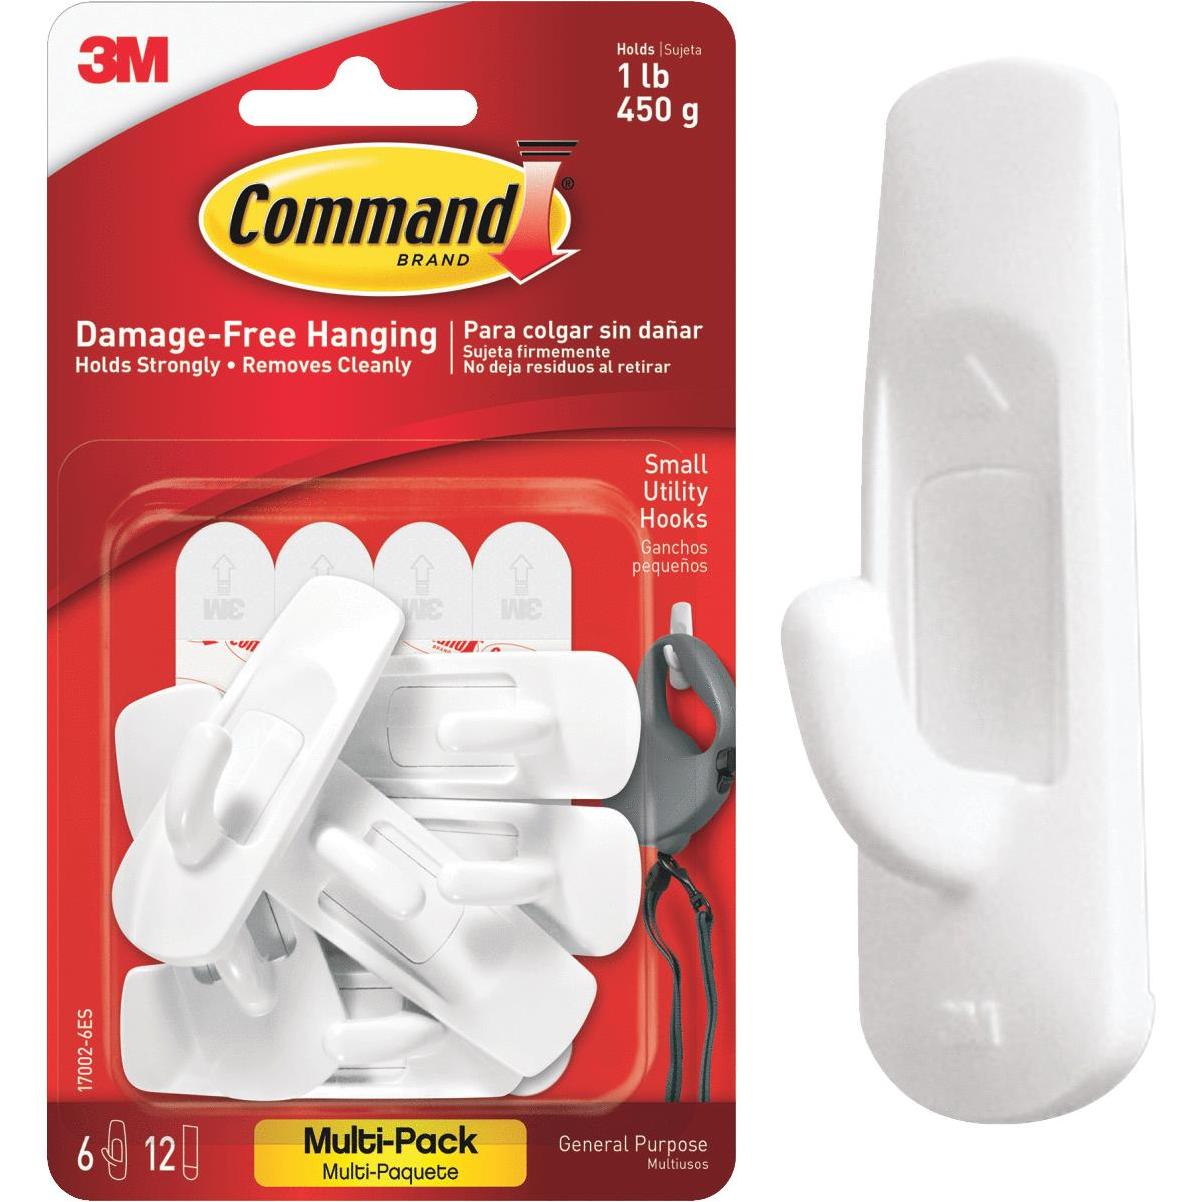 Command Small Utility Adhesive Hook (6-Pack)